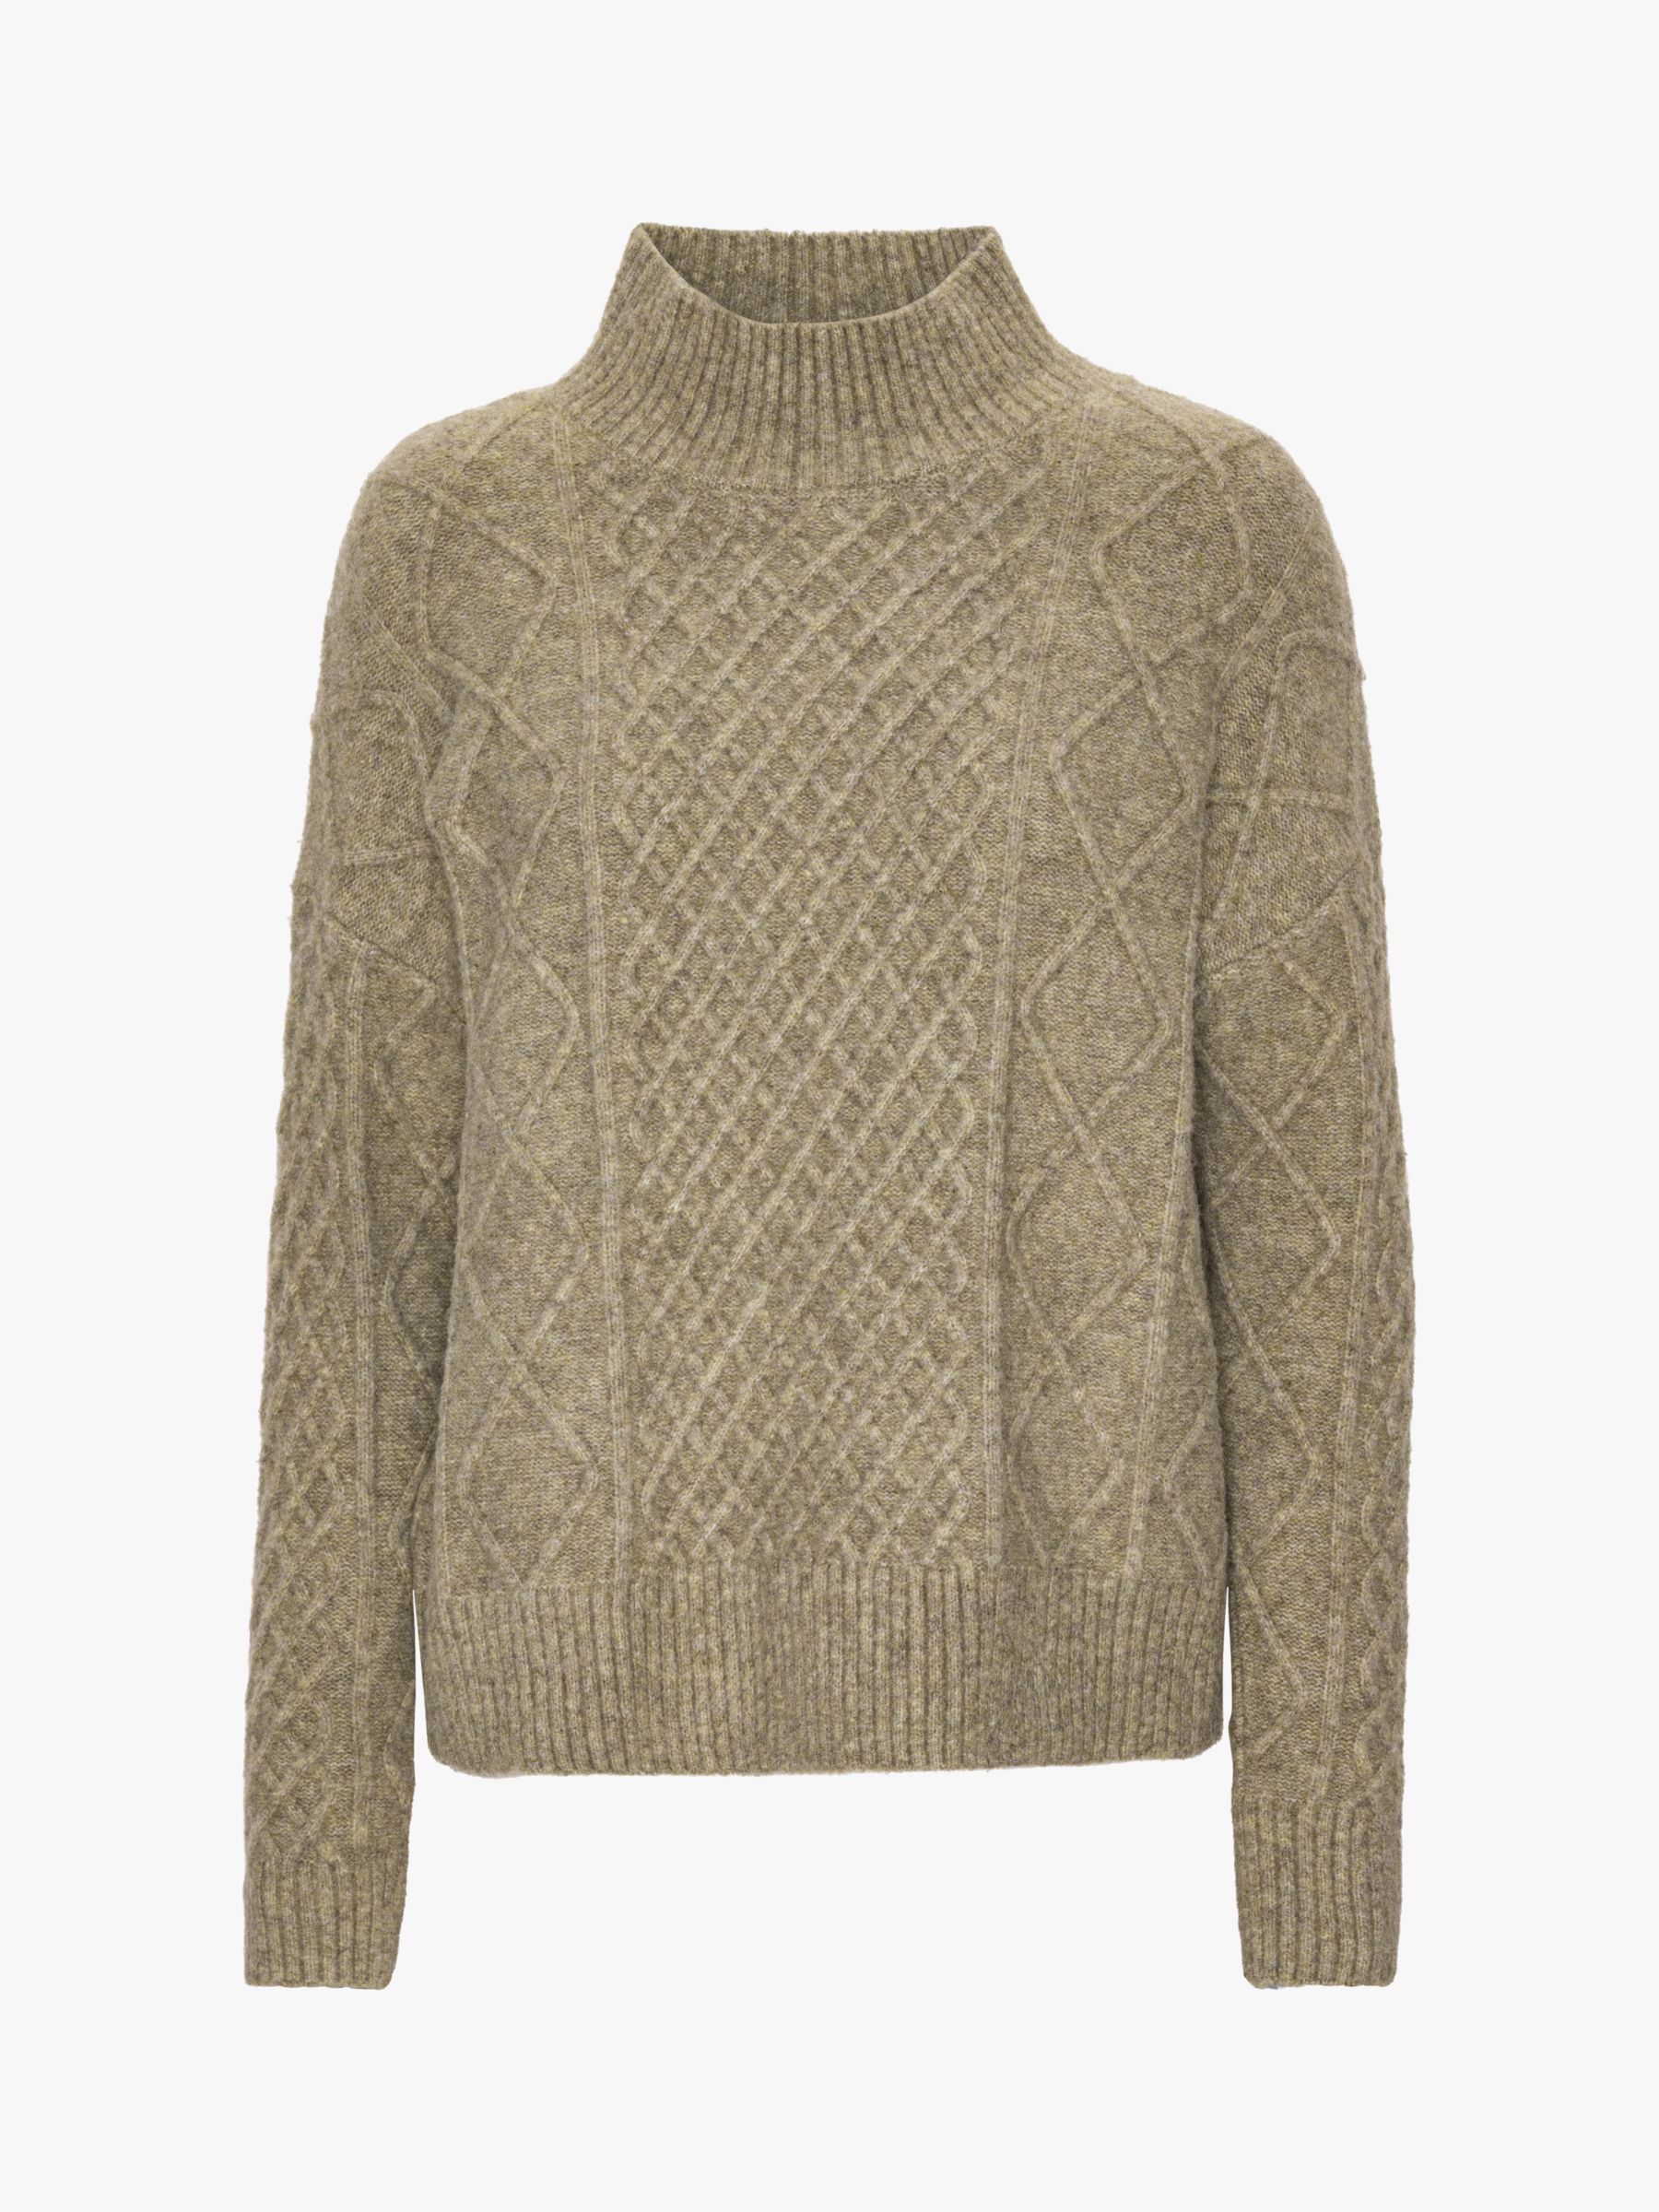 Buy A-VIEW Uvenas Knitted High Neck Jumper Online at johnlewis.com